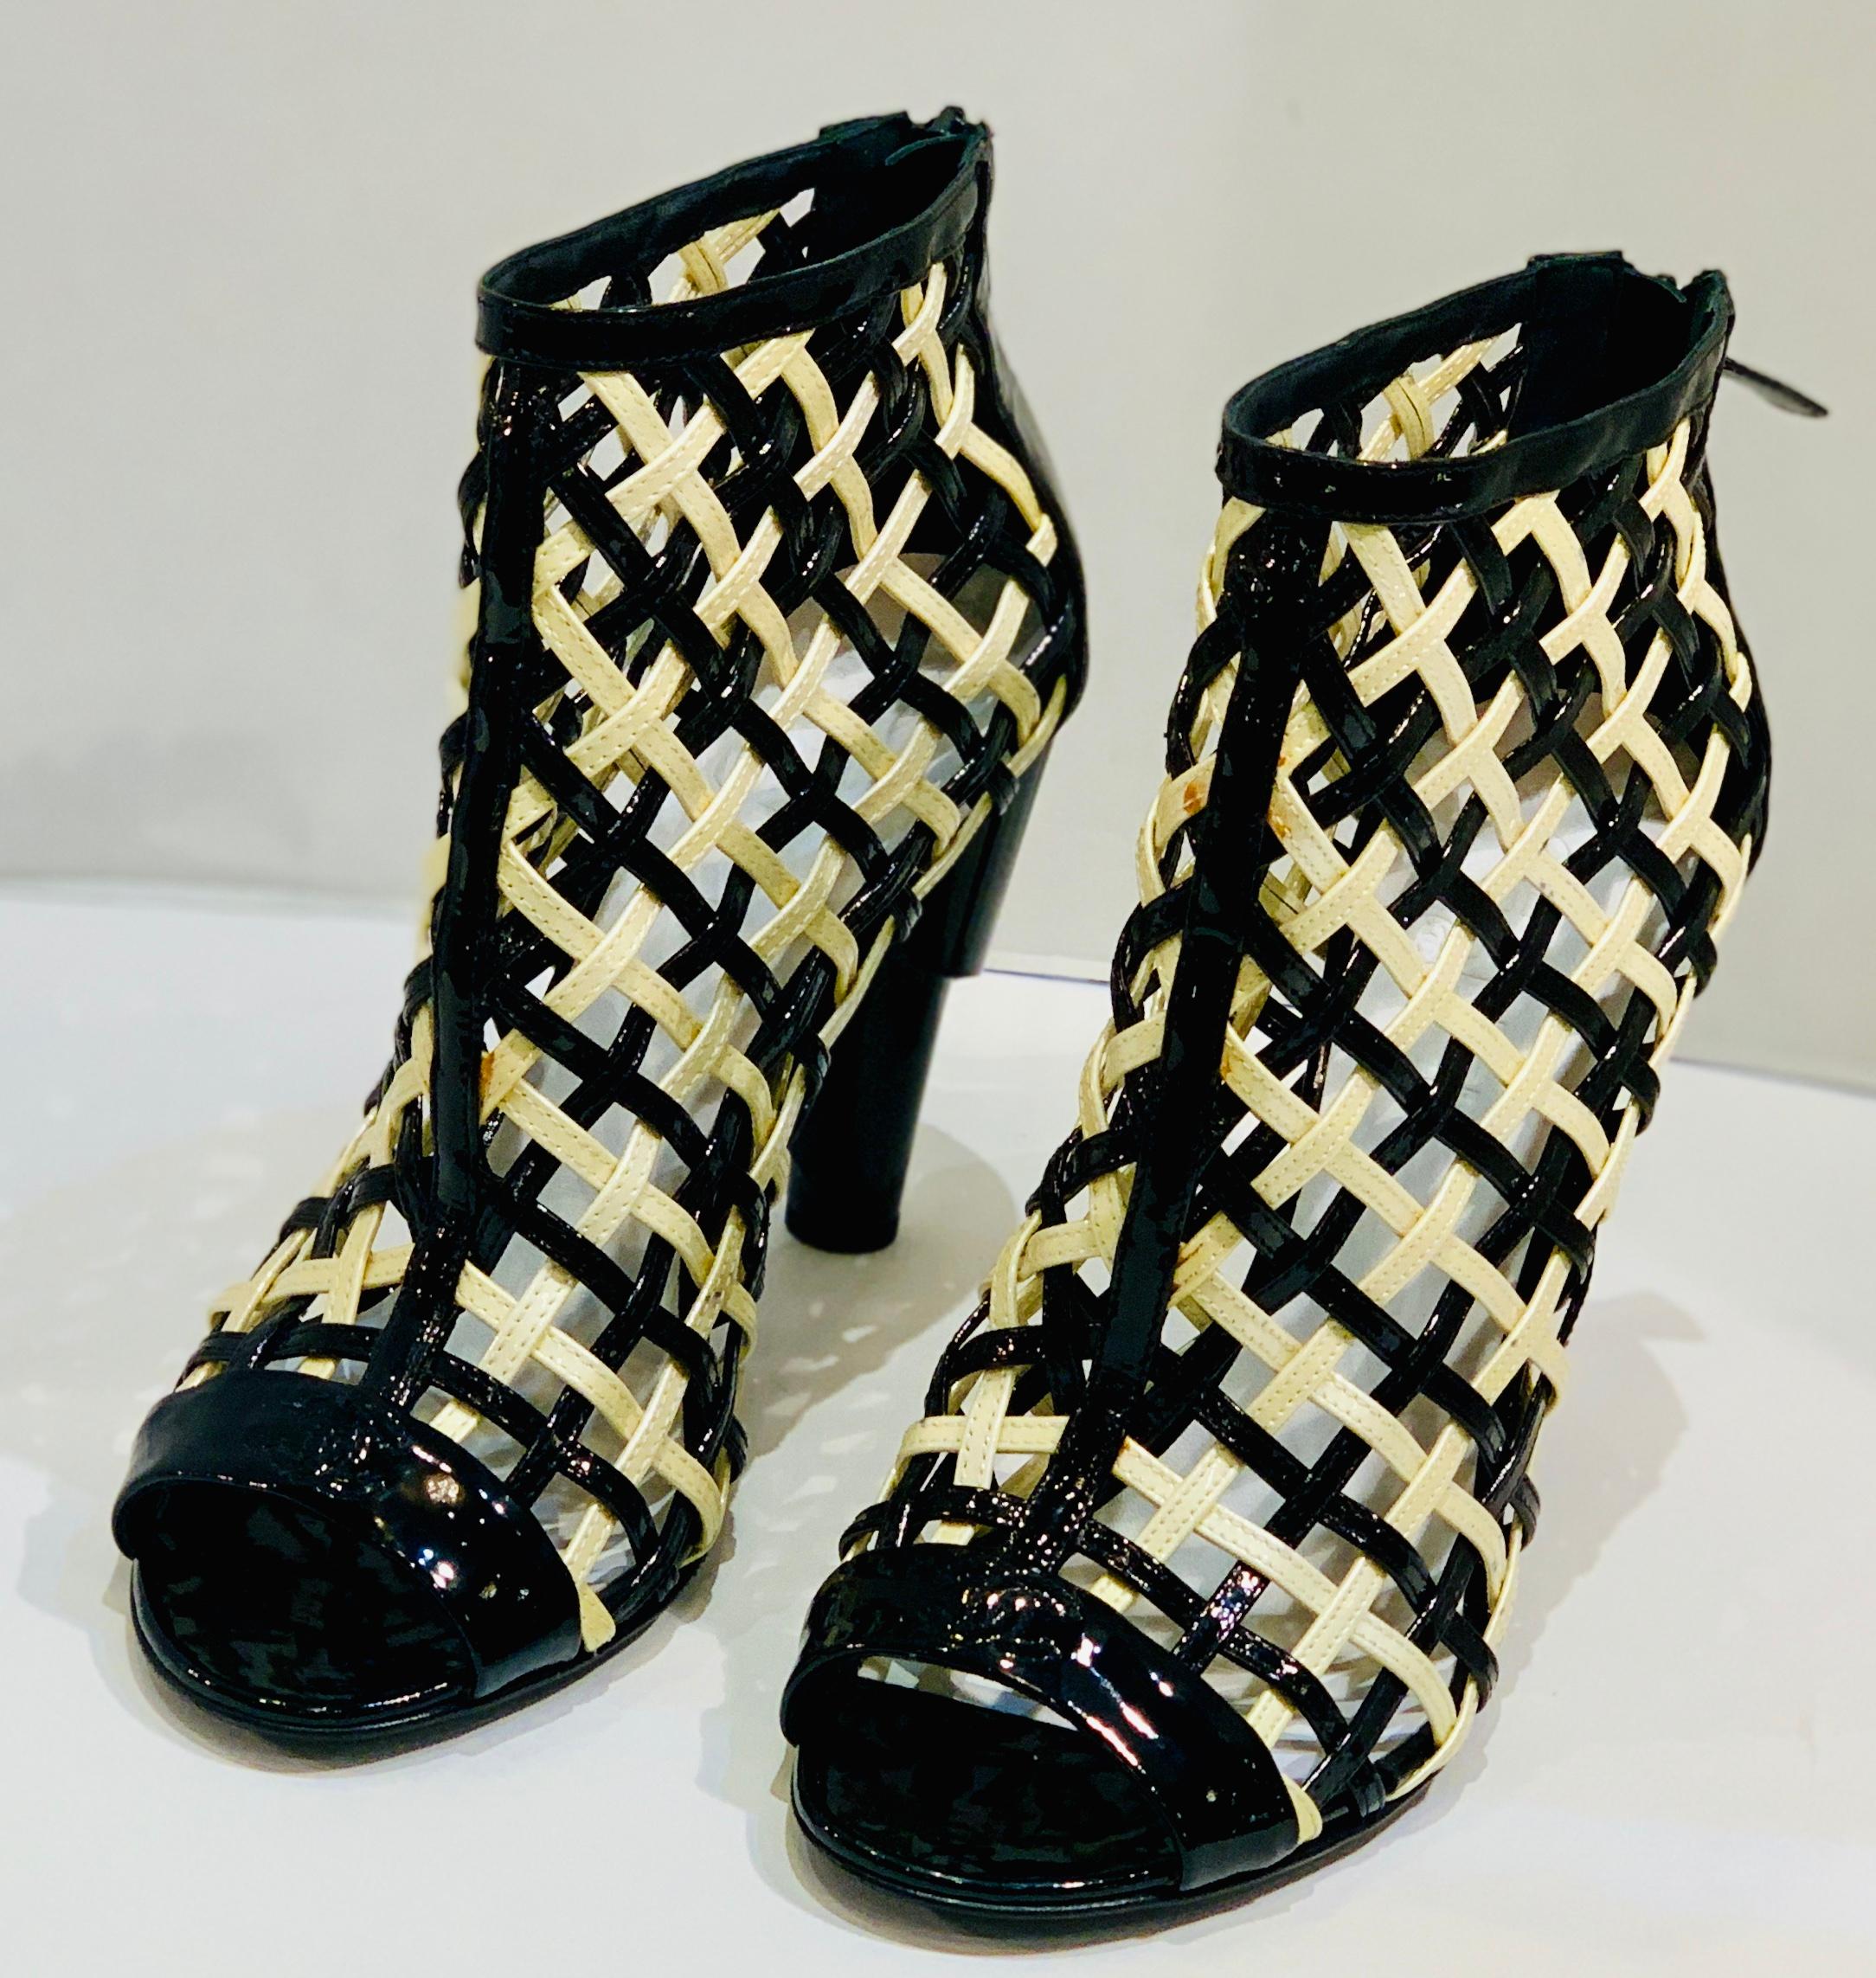 
Hard to find size 11 or 41, Chanel Black and White Patent Leather Cage Peep Toe Booties Shoes from the Spring 2015 runway collection of the legendary luxury brand Chanel. These edgy, ankle high booties feature glossy patent leather in white and